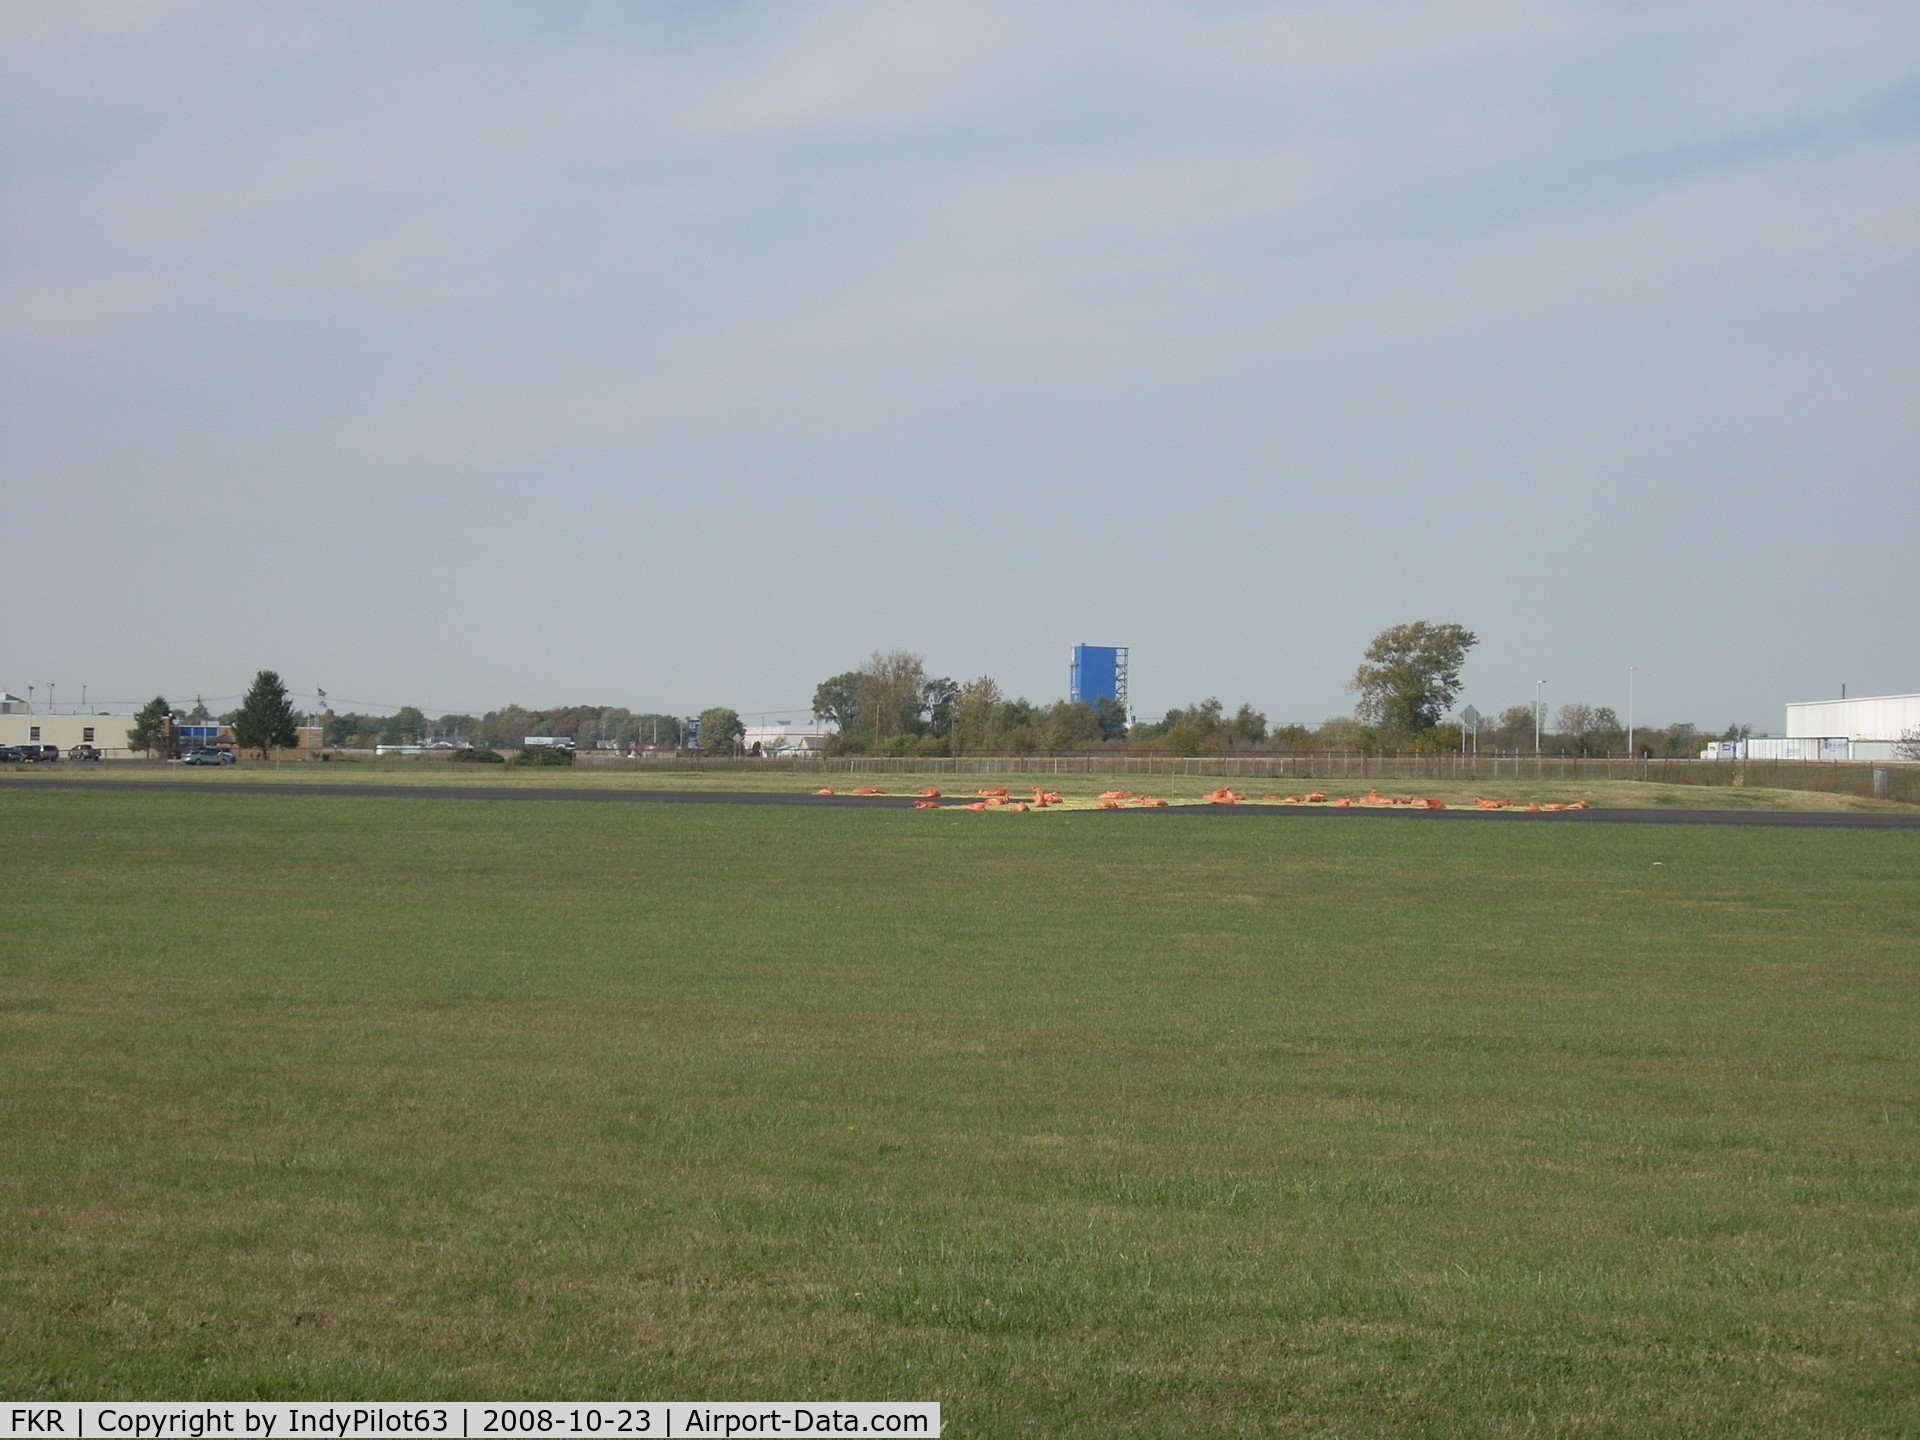 Frankfort Municipal Airport (FKR) - What looks like paving work to runway 22...a tiny runway, it stretches only 2,527 long. This is where I landed for my first ever cross country!